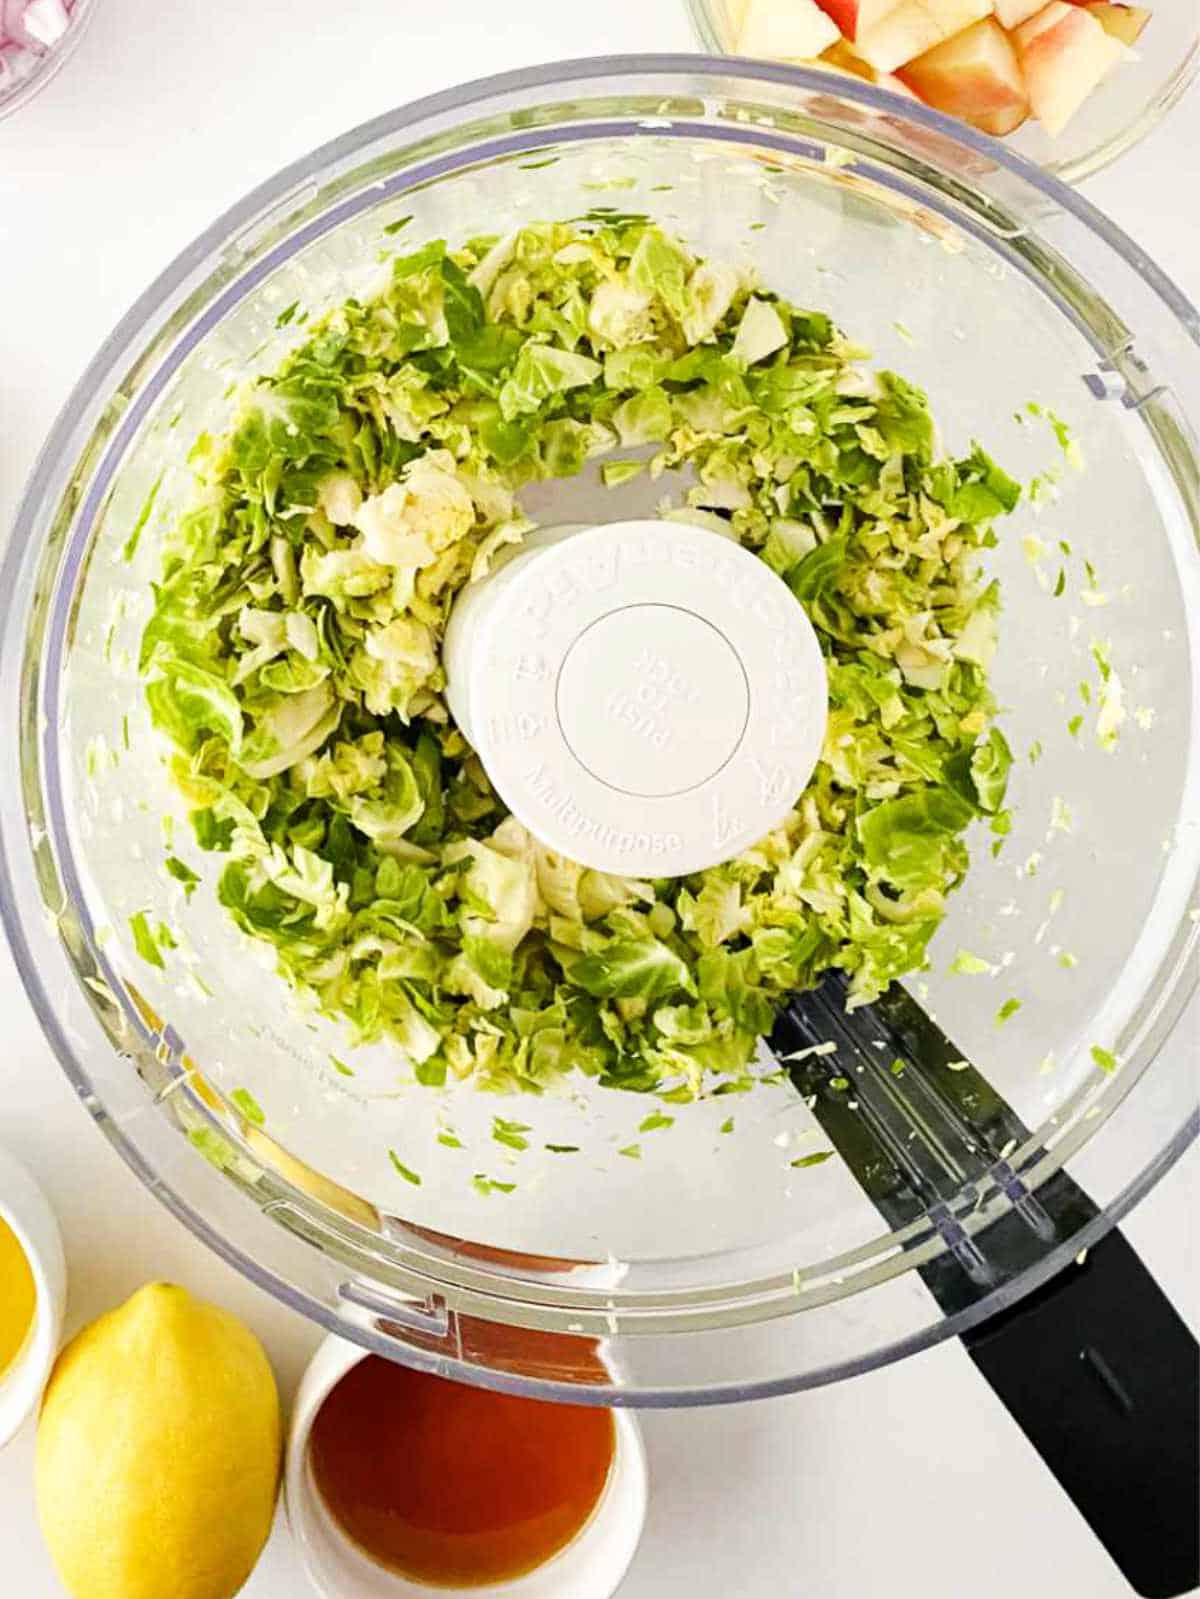 shredded brussels sprouts in a food processor.